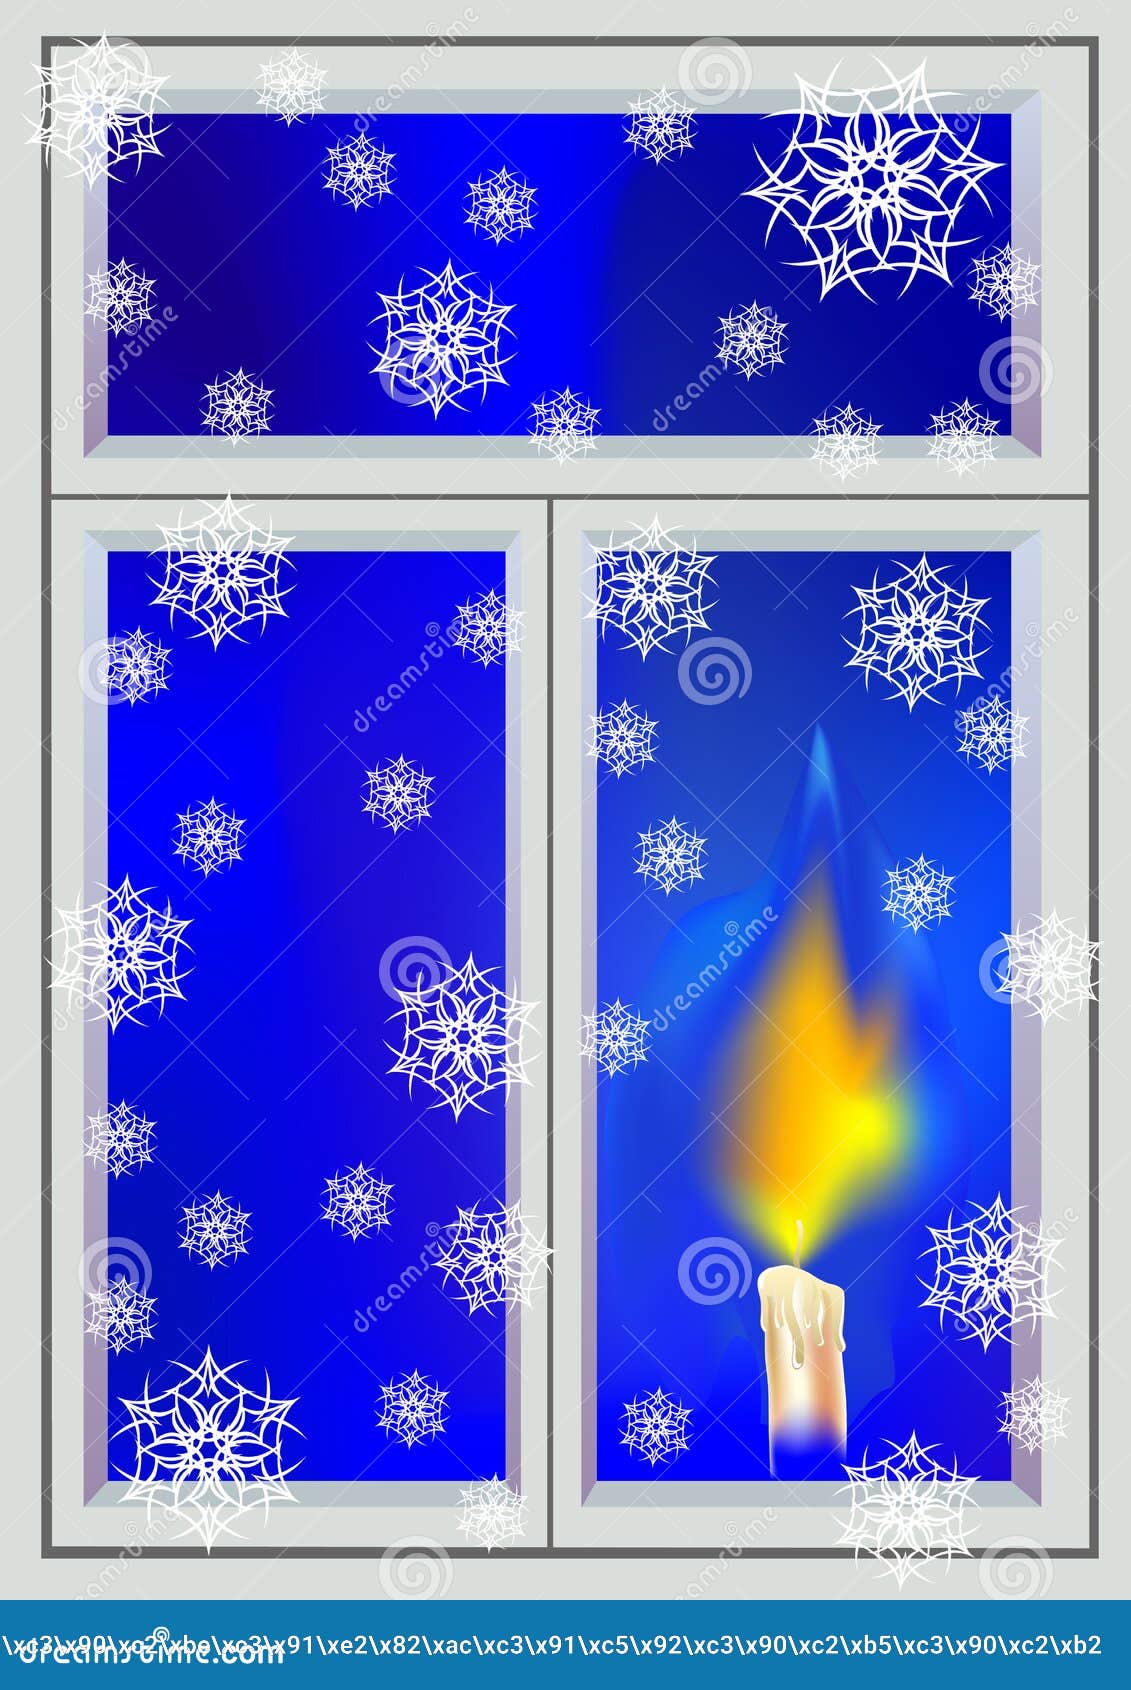 Candle in the window stock vector. Illustration of traditional - 11625360